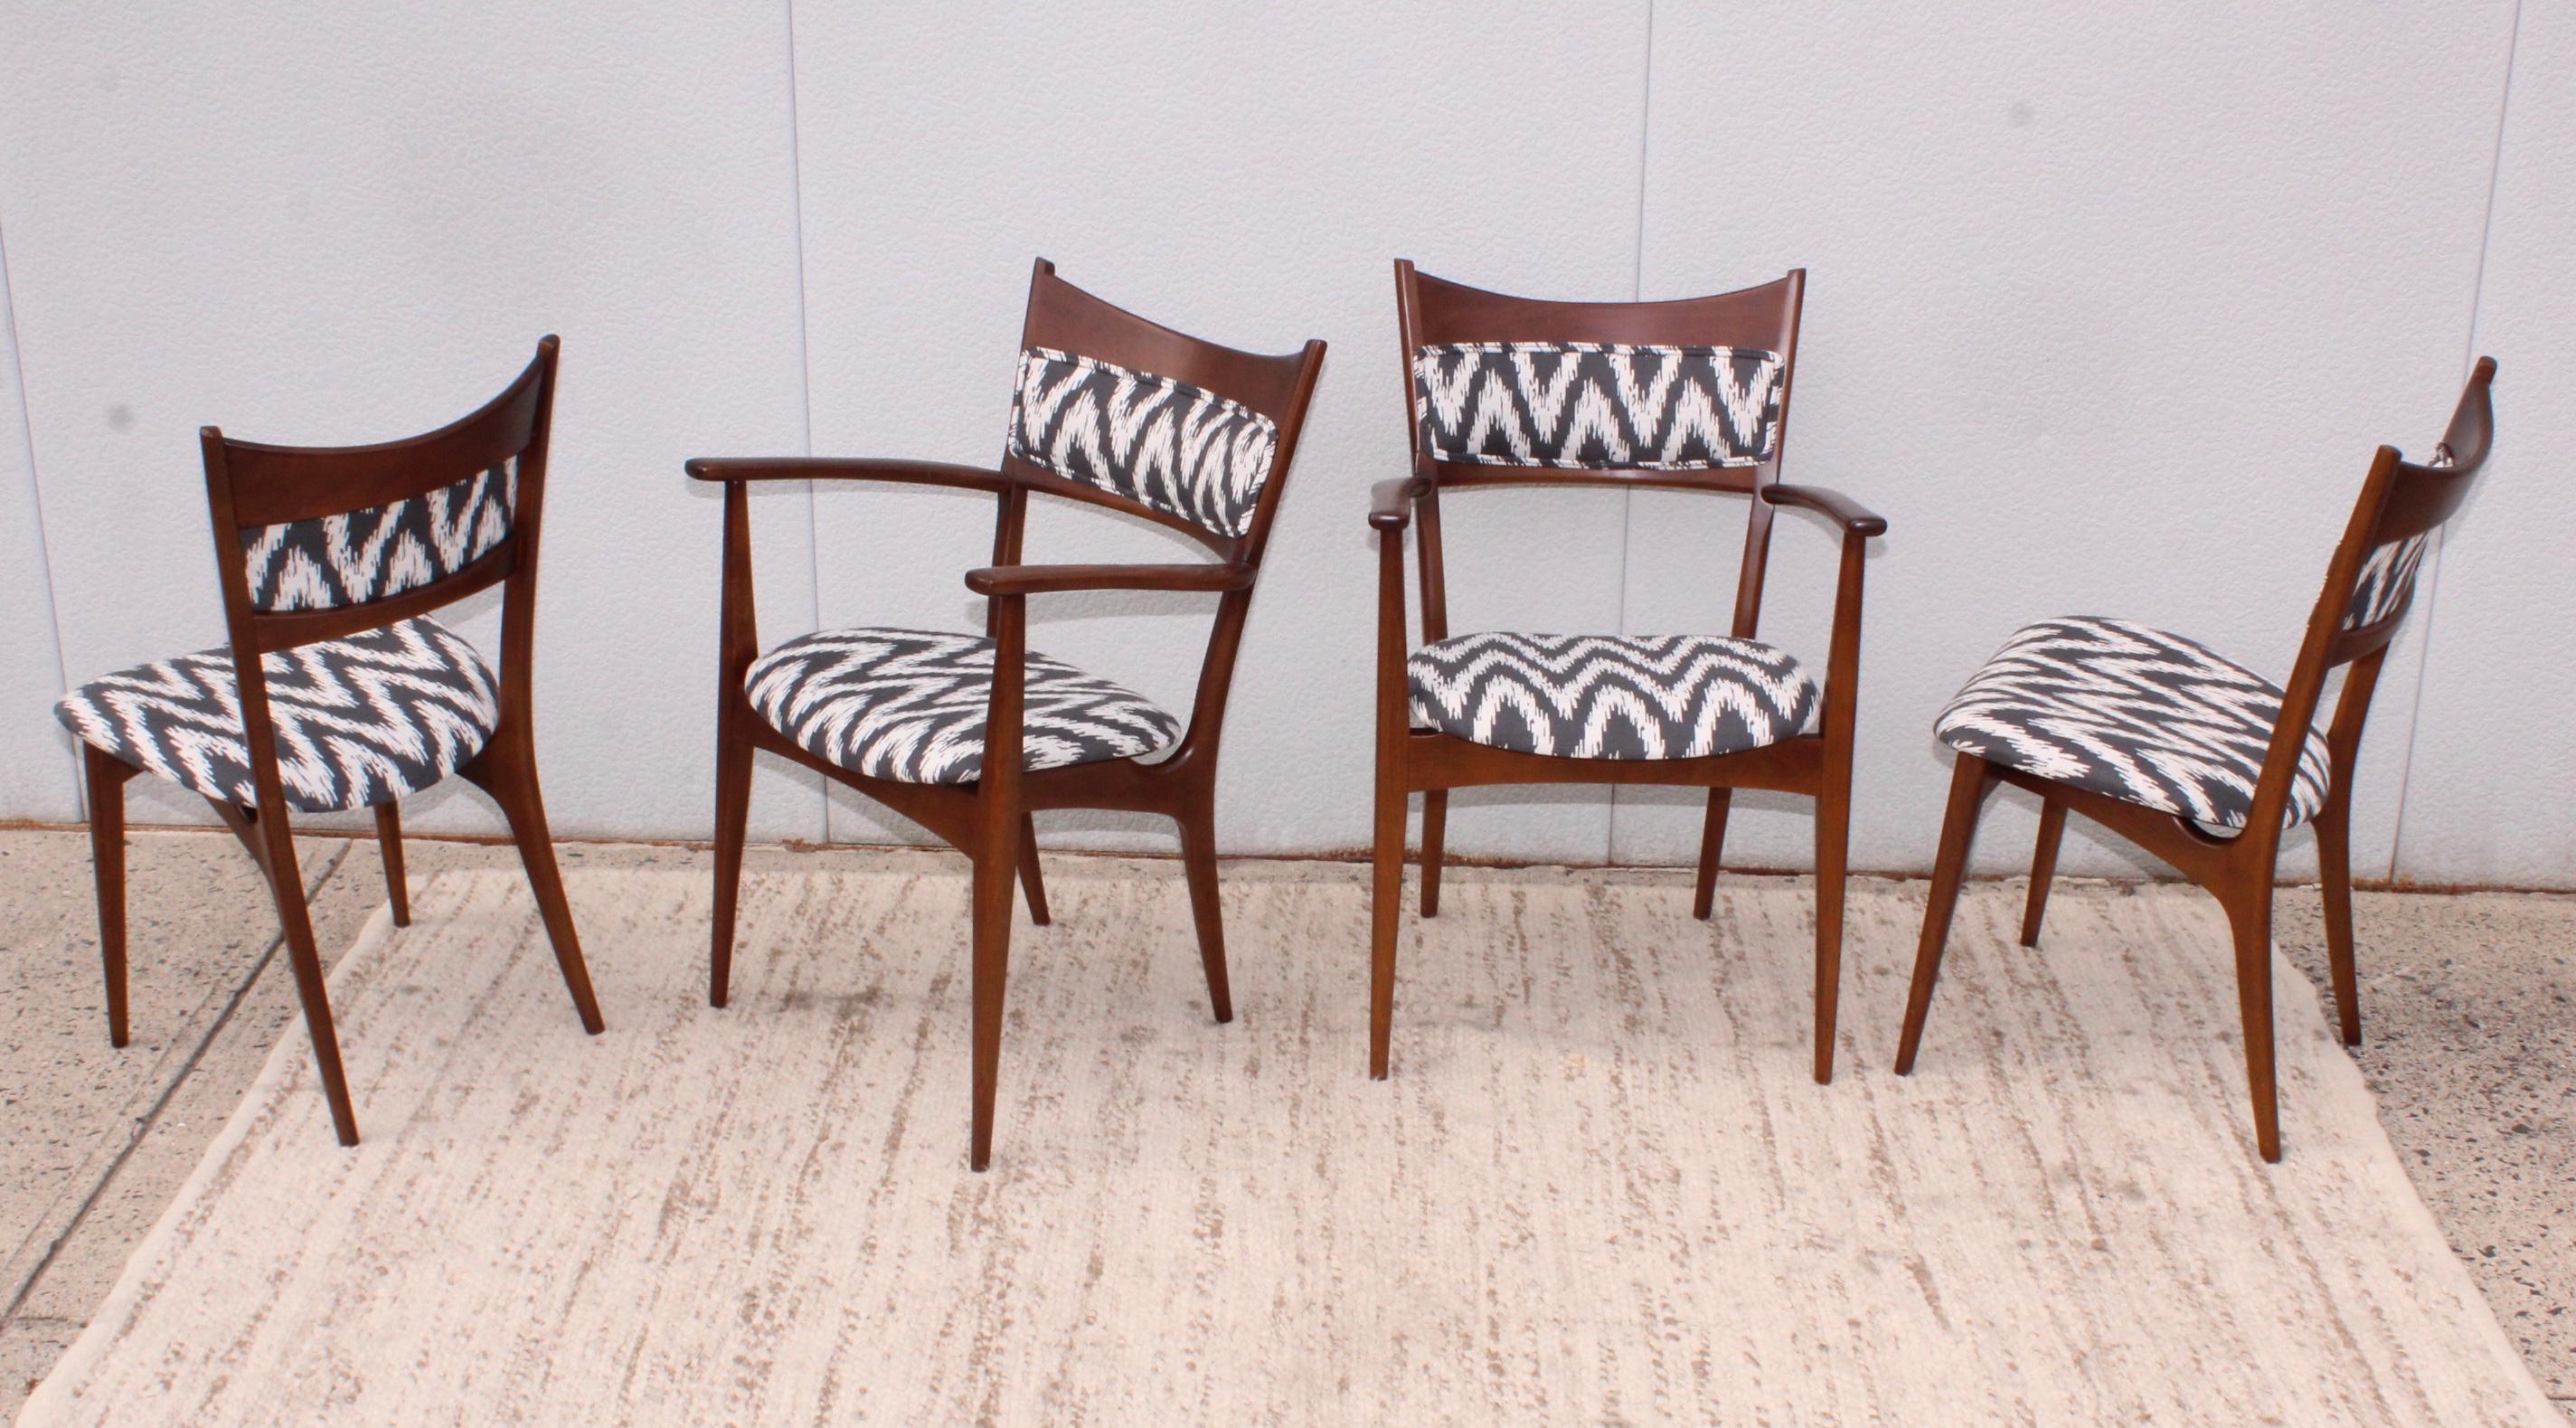 1960s Mid-Century Modern sculptural dining chairs in the style of Vladimir Kagan, two armchairs and two side chairs lightly restored and newly re-upholstered.

Side chairs measurements: width 18” depth 22” height 33.5” seat height 18.